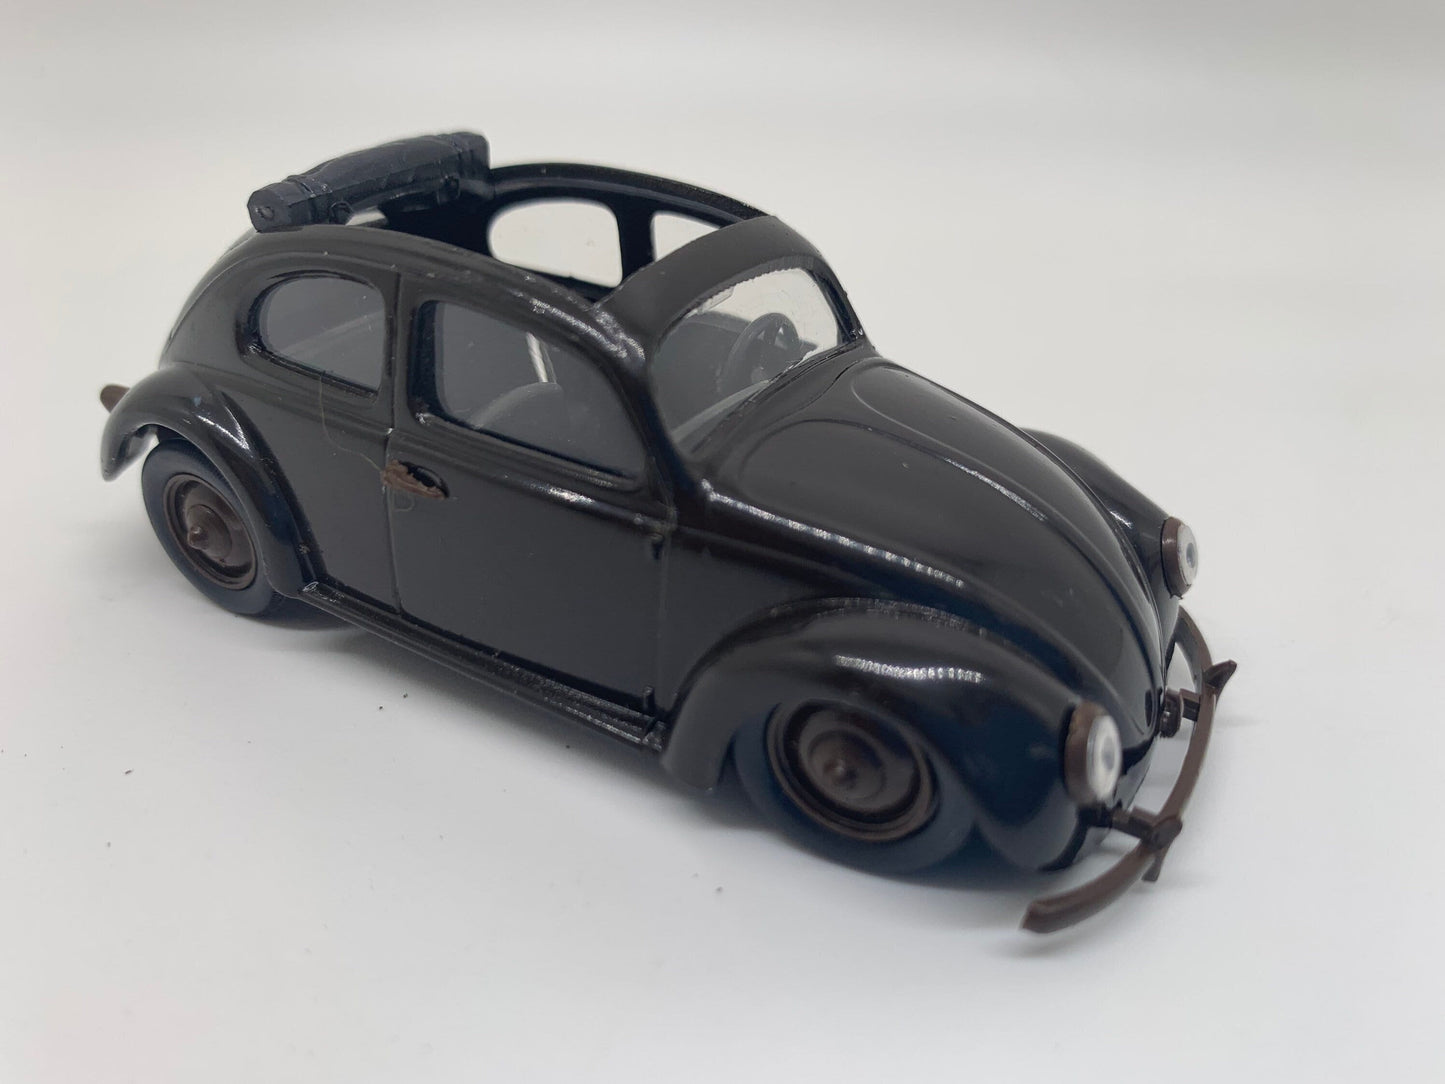 Vitesse Volkswagen 1947 Dark Brown Perfect Birthday Gift Miniature Collectable Scale Model Toy Car